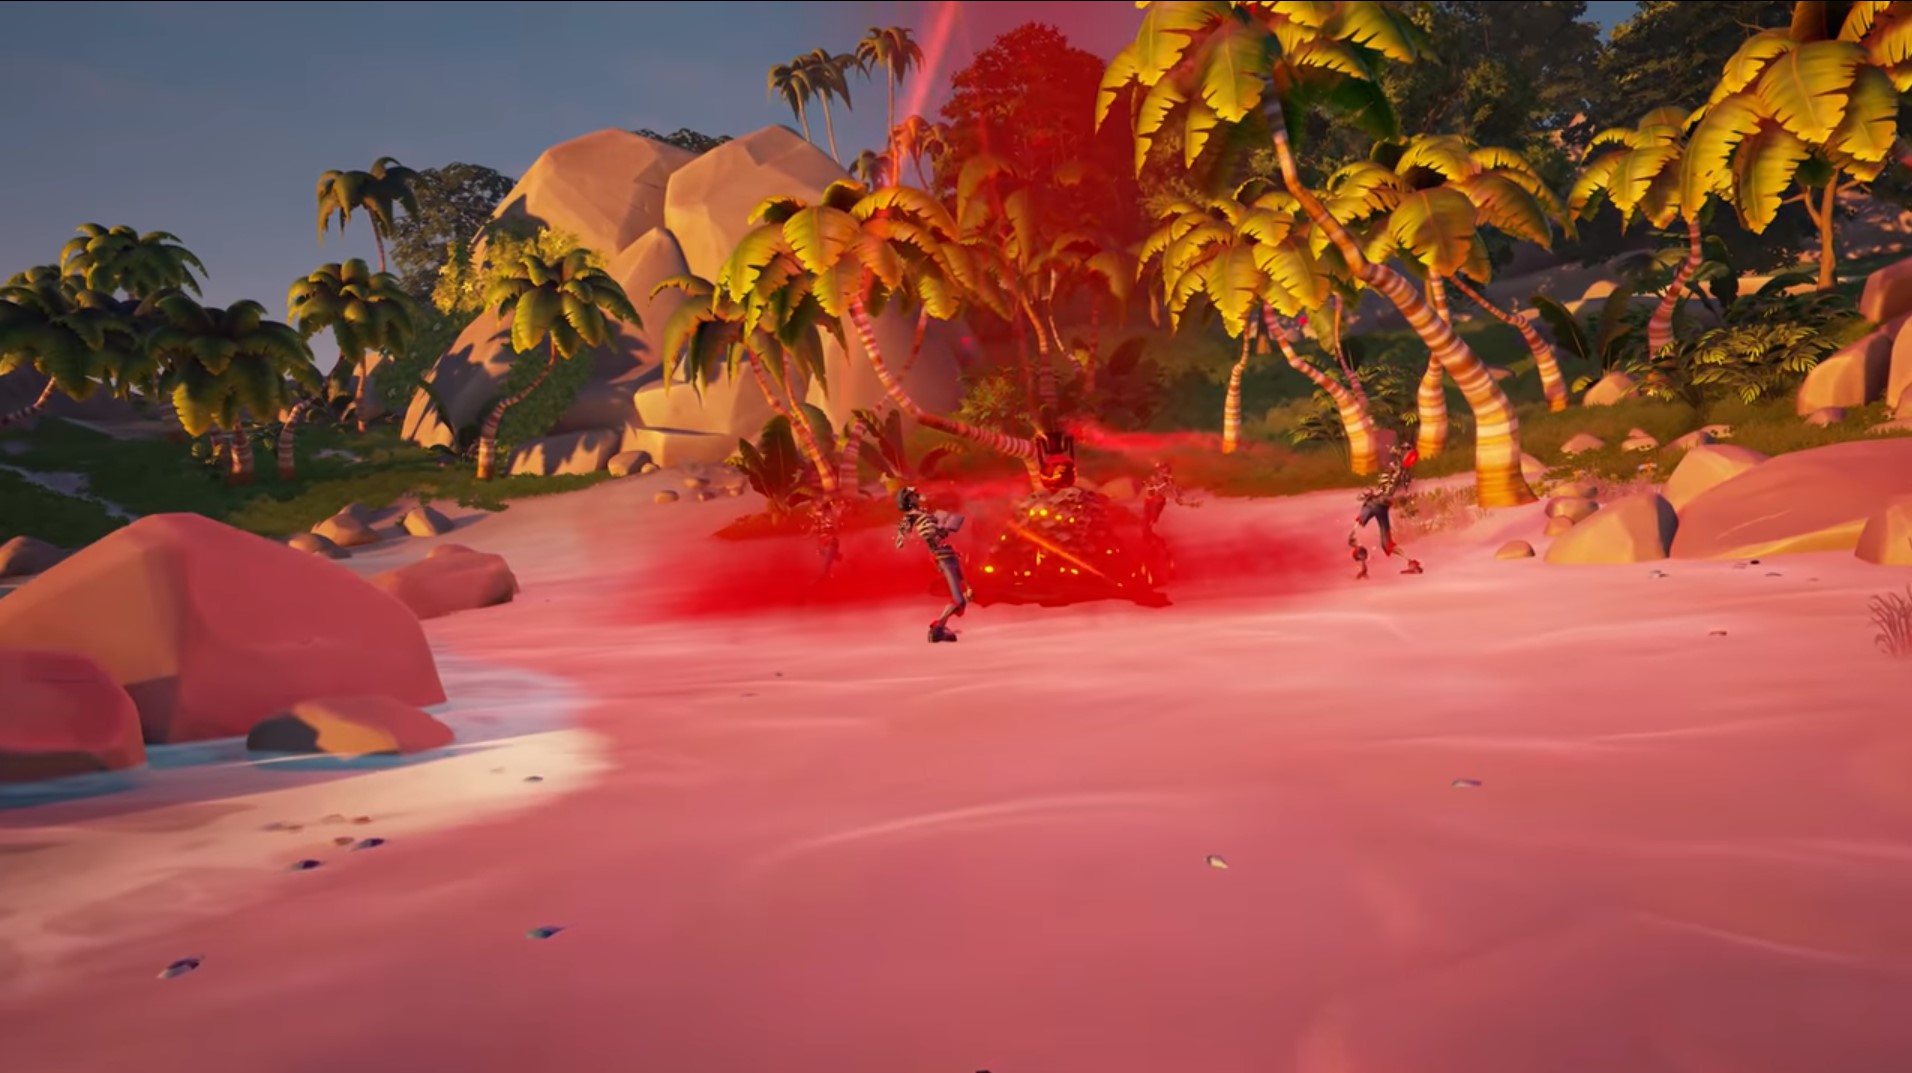  How to beat Ashen Lords in Sea of Thieves Ashen Winds update – Weaknesses, counters, tactics 